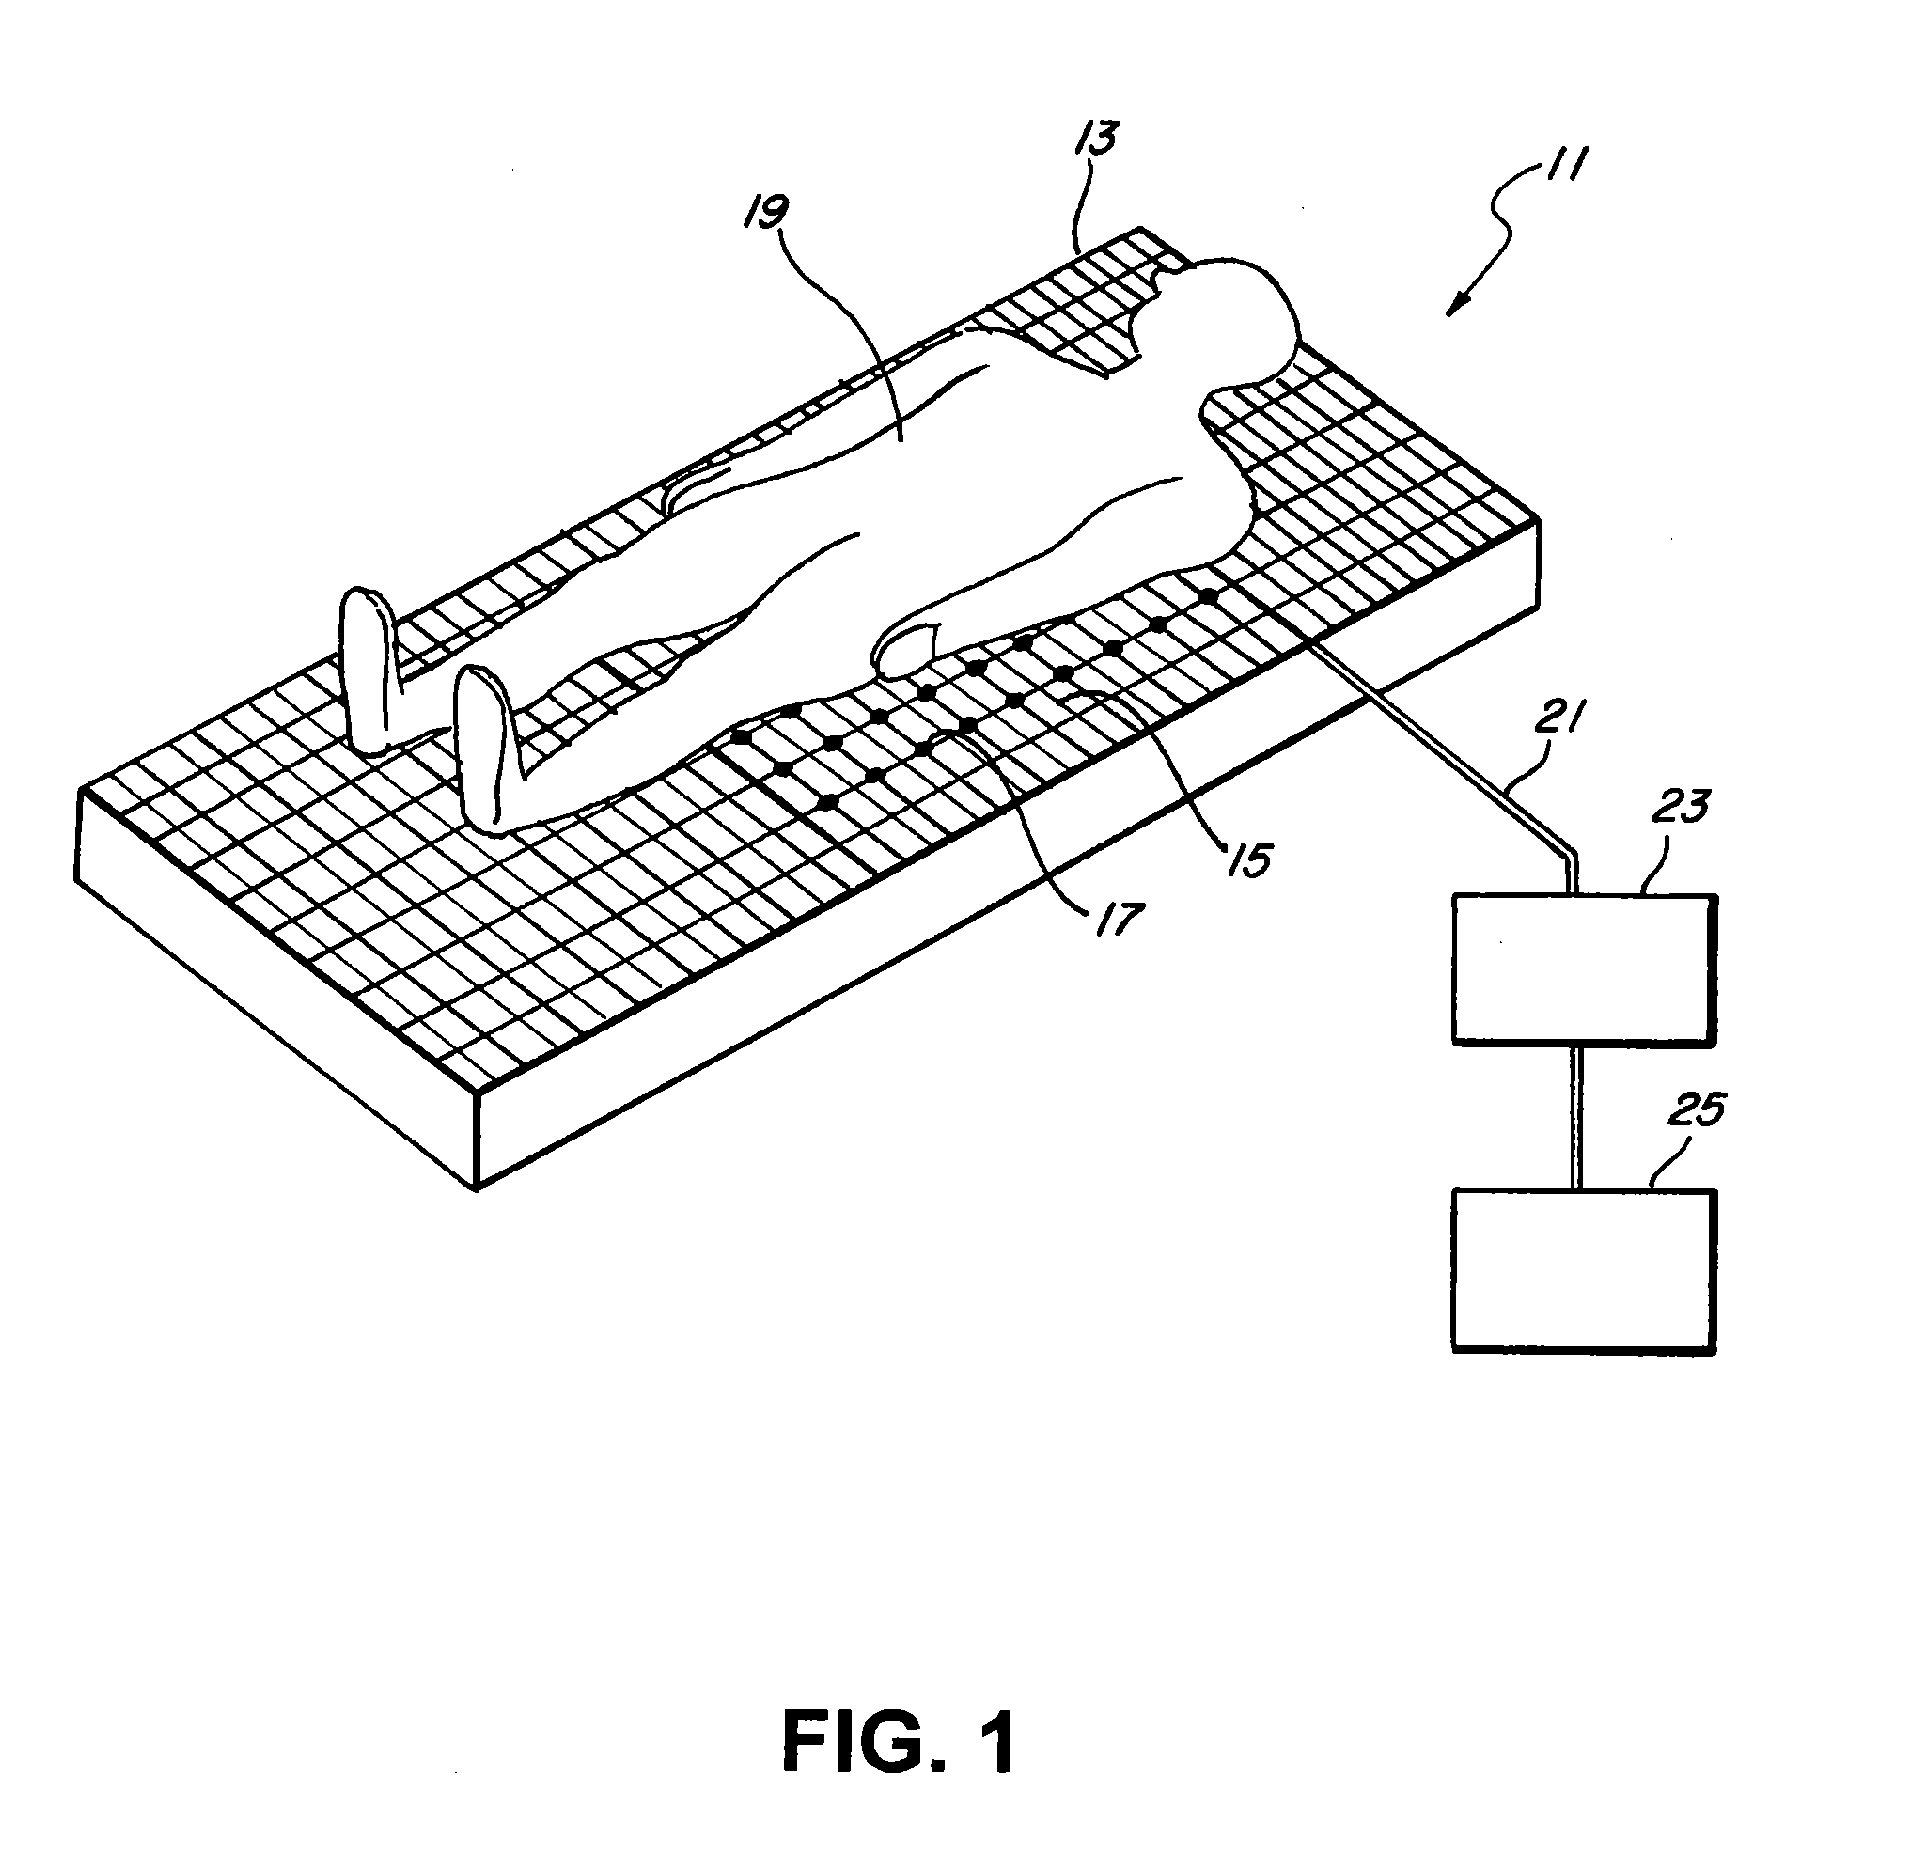 Method And System For Monitoring Pressure Areas On A Supported Body